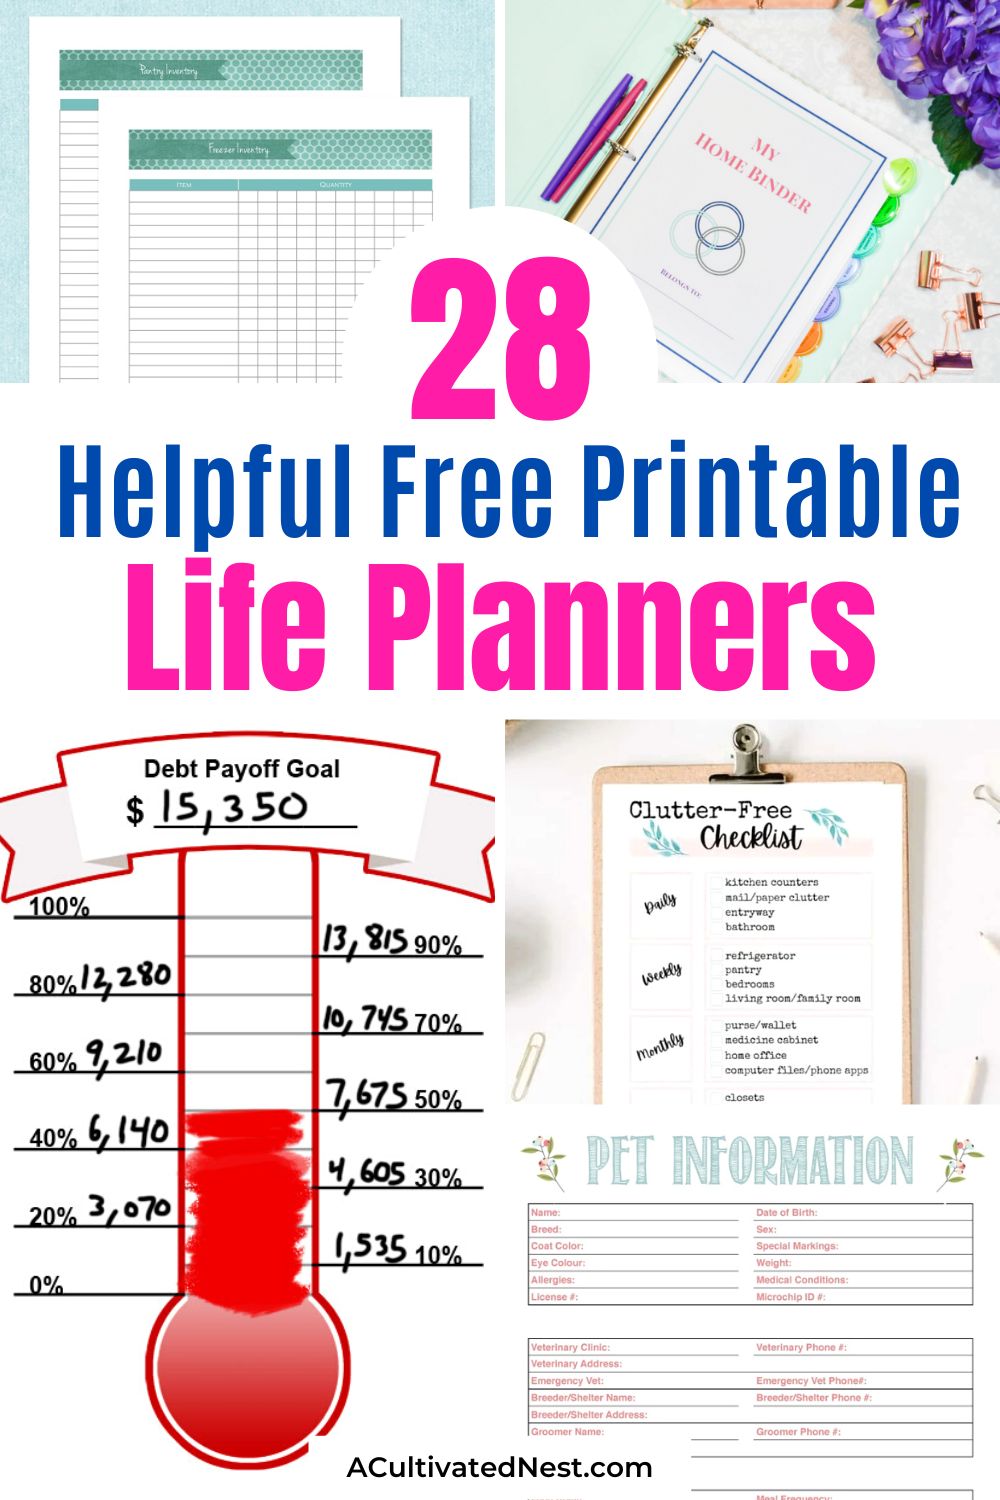 28 Helpful Free Printable Life Planners- Do you want to get your life organized this year? Then you'll love these free printable life planners! They're so easy to use and helpful! | free printable planners, #freePrintables #lifePlanner #plannerPrintables #freePlannerPrintables #ACultivatedNest